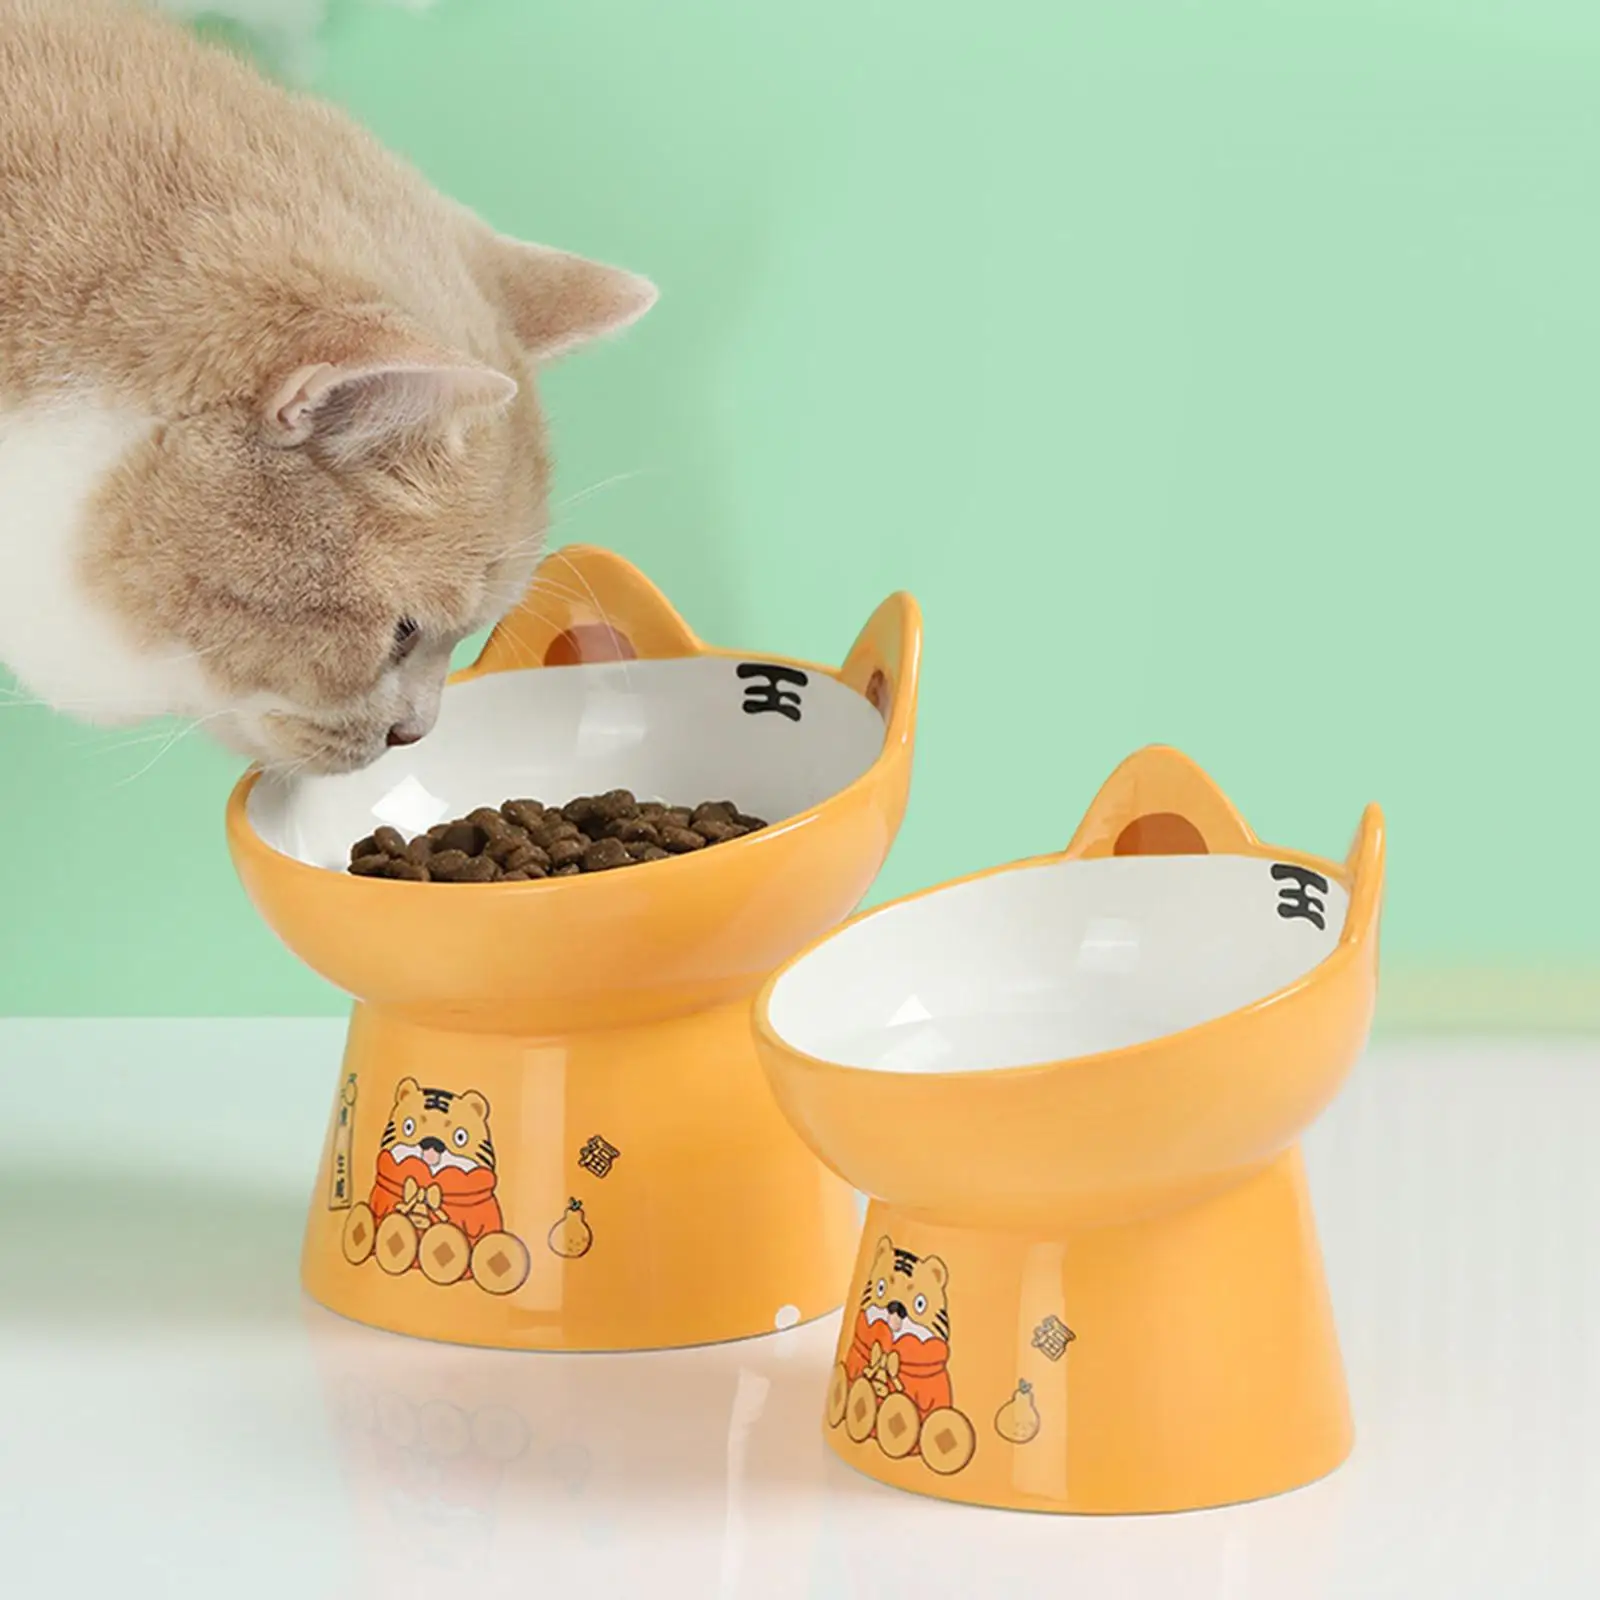 Cat Feeding and Drinking Tilted Cat Dish Cleaning safely pet Bowls for Cats Pet Supplies Accessories